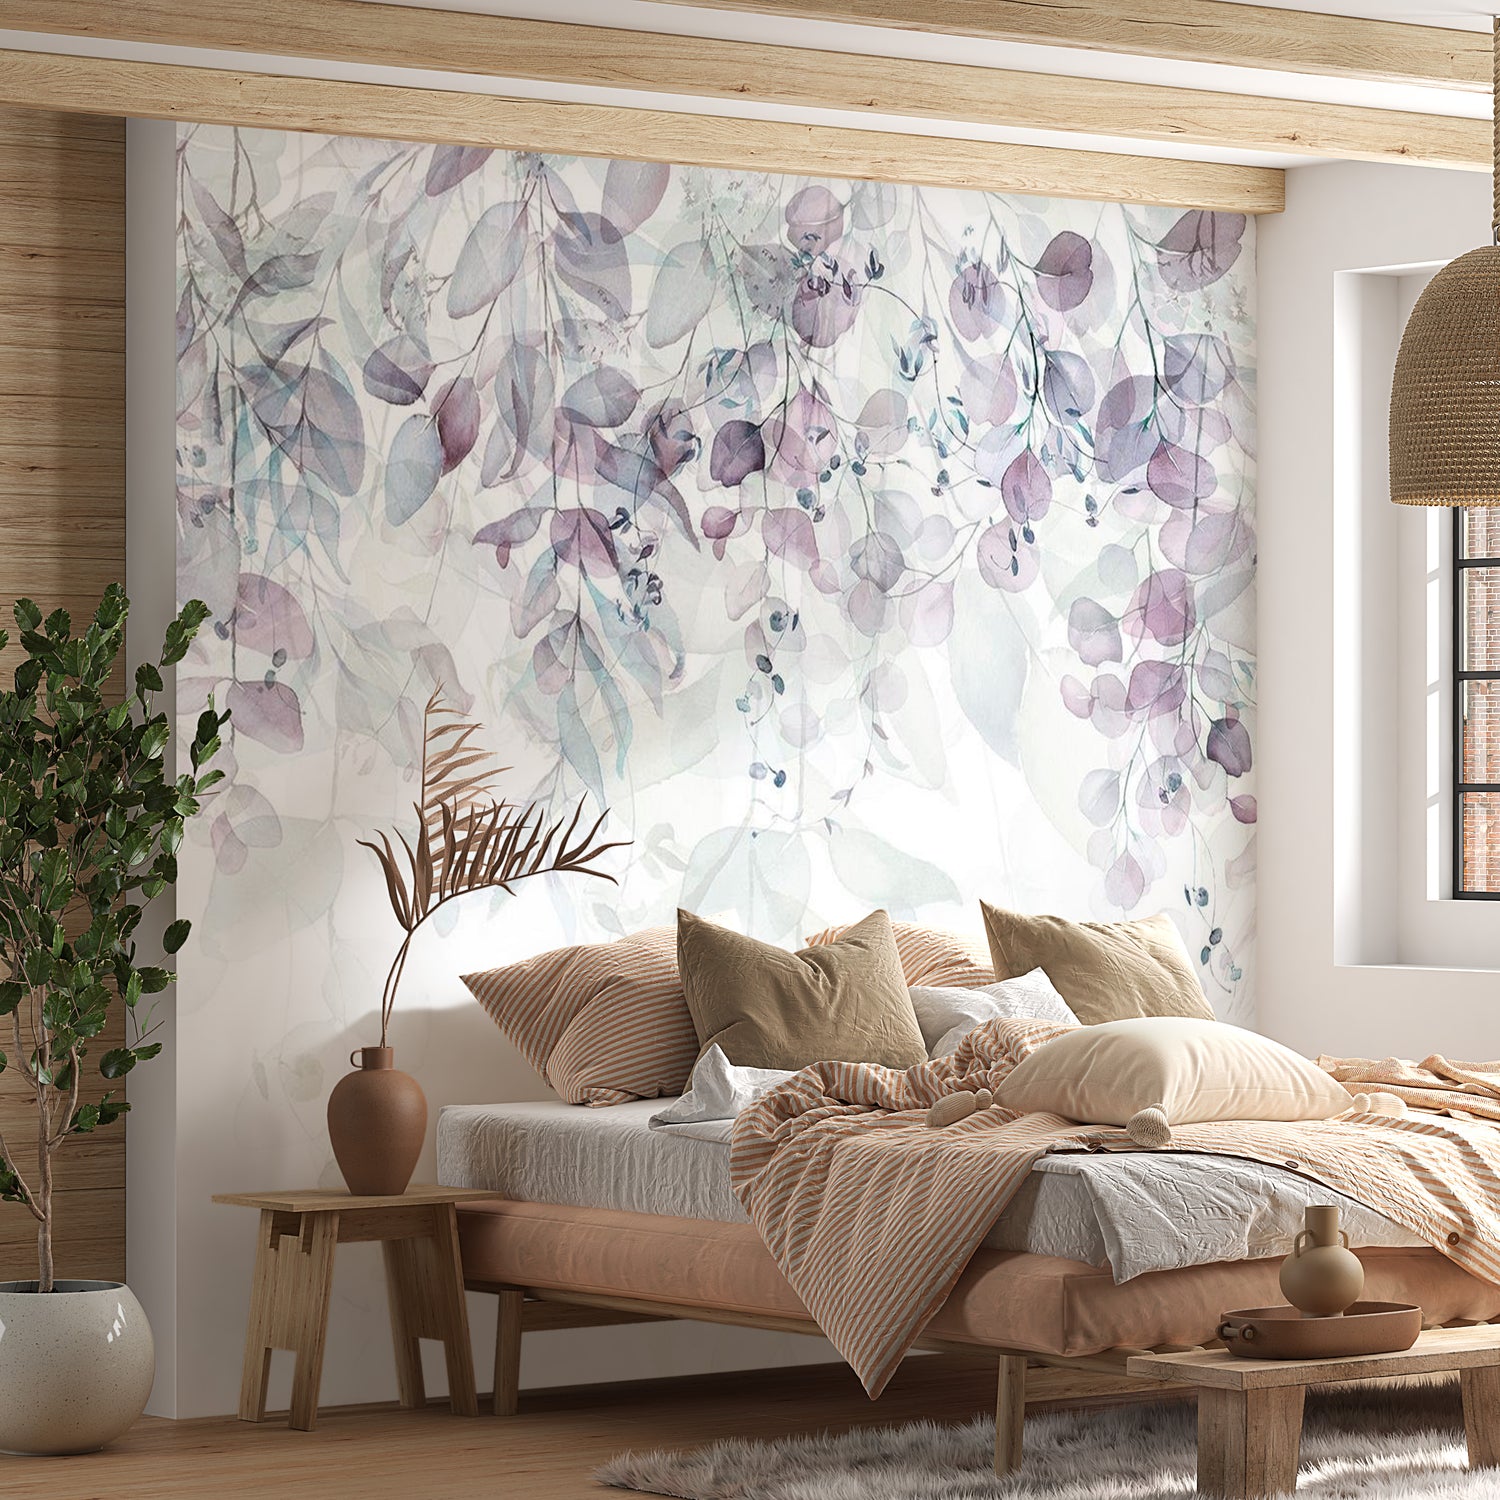 Peel & Stick Botanical Wall Mural - Pastel Gentle Touch Of Nature - Removable Wall Decals